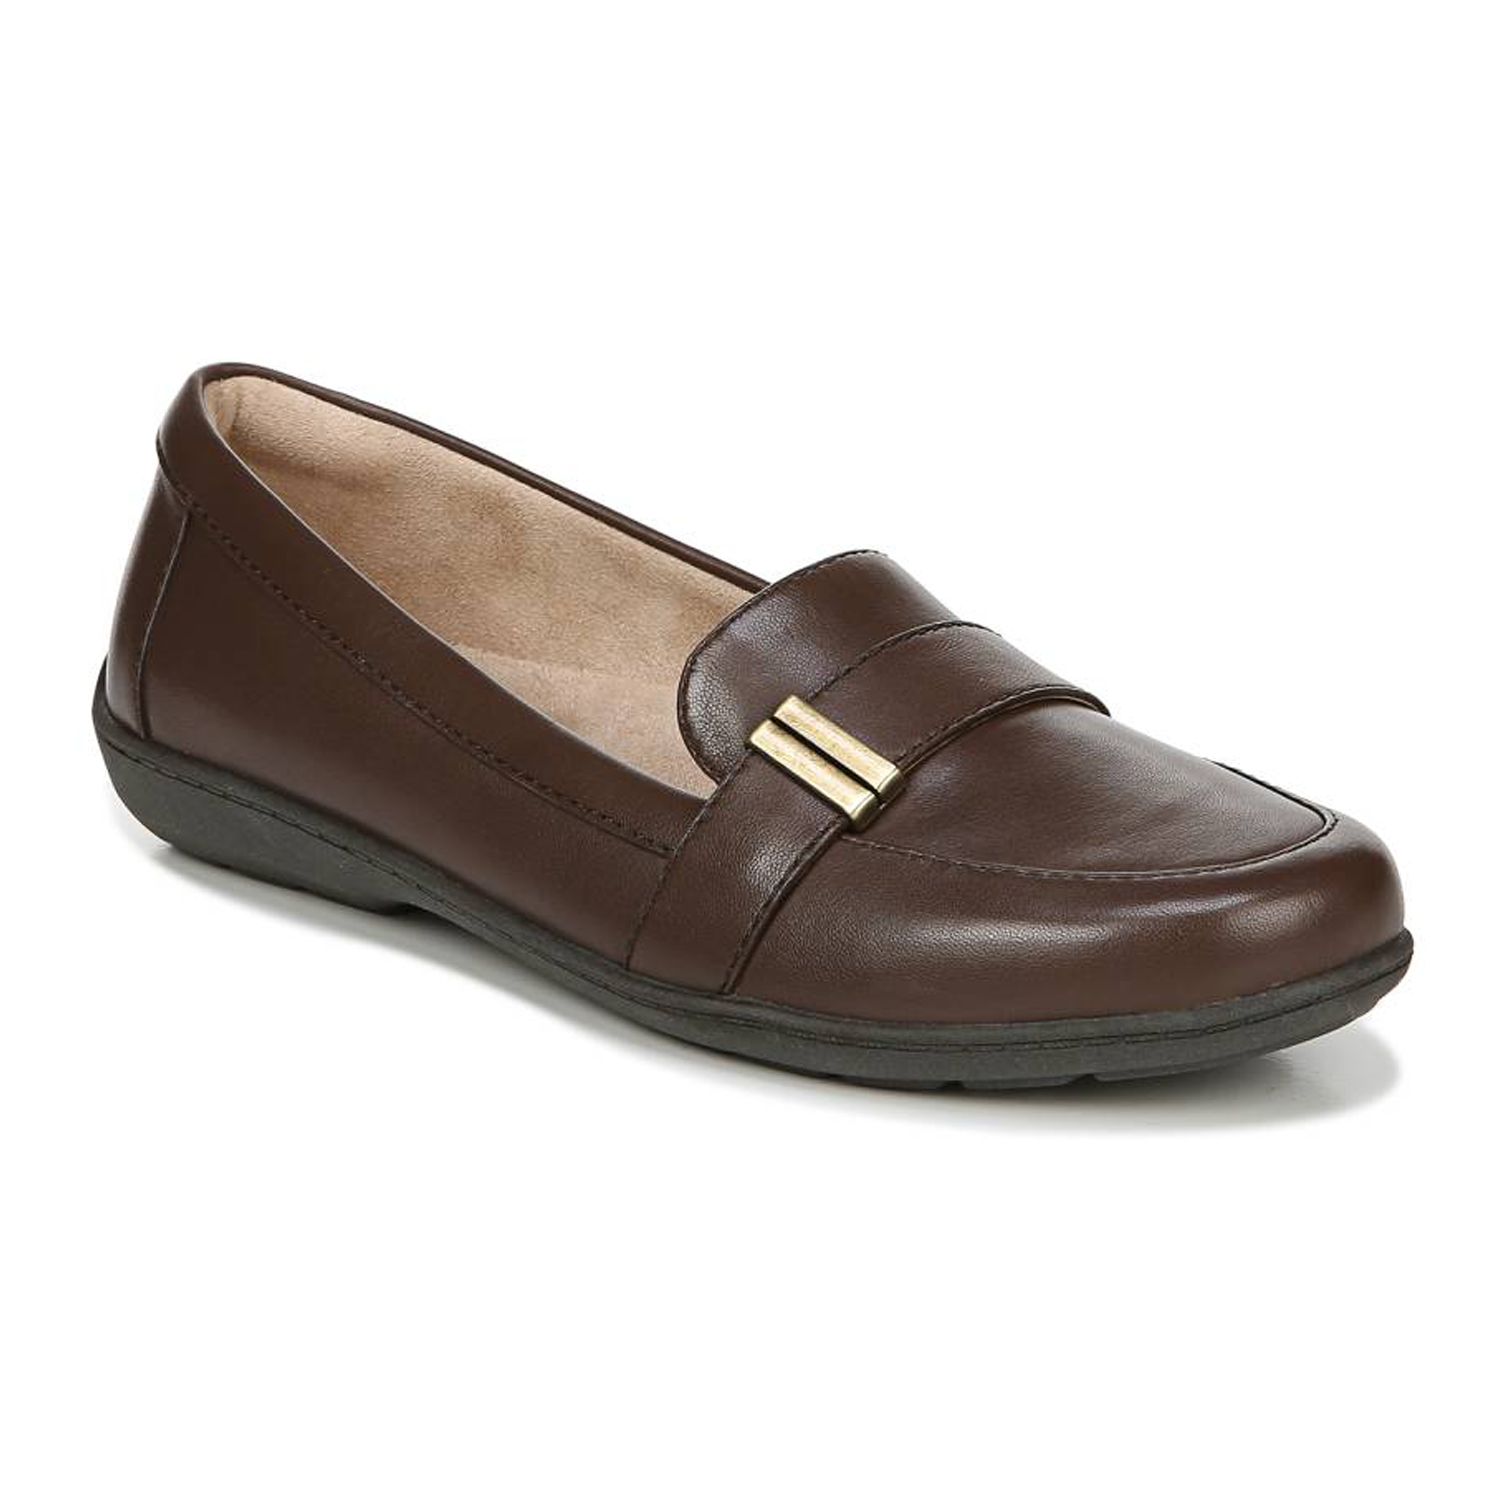 brown dress shoes for women